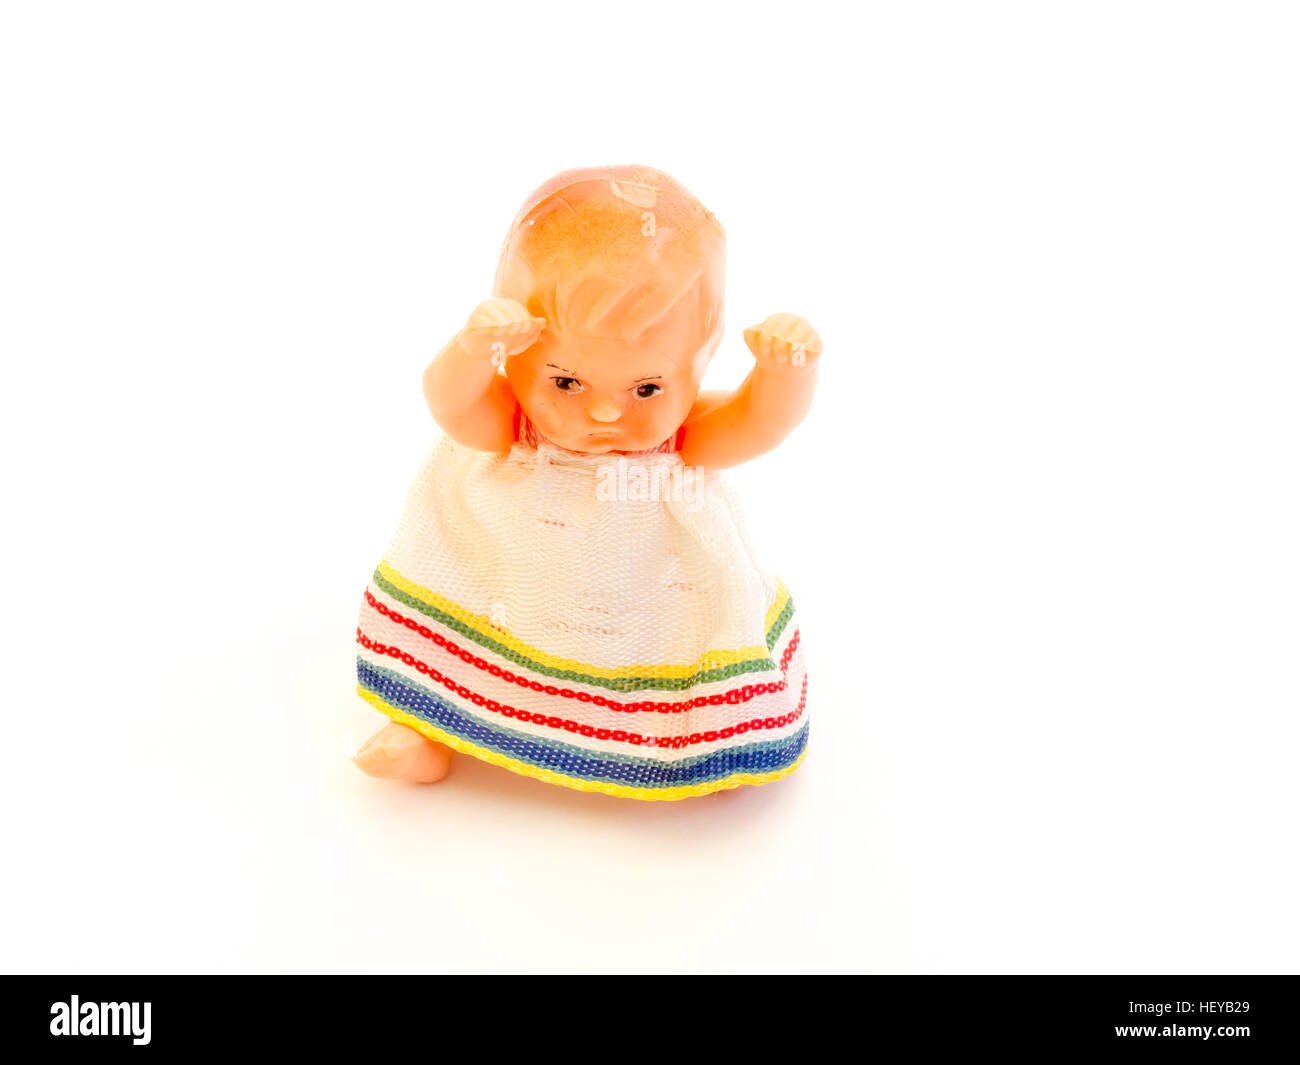 The Miniature yellow baby toy. Stock Photo